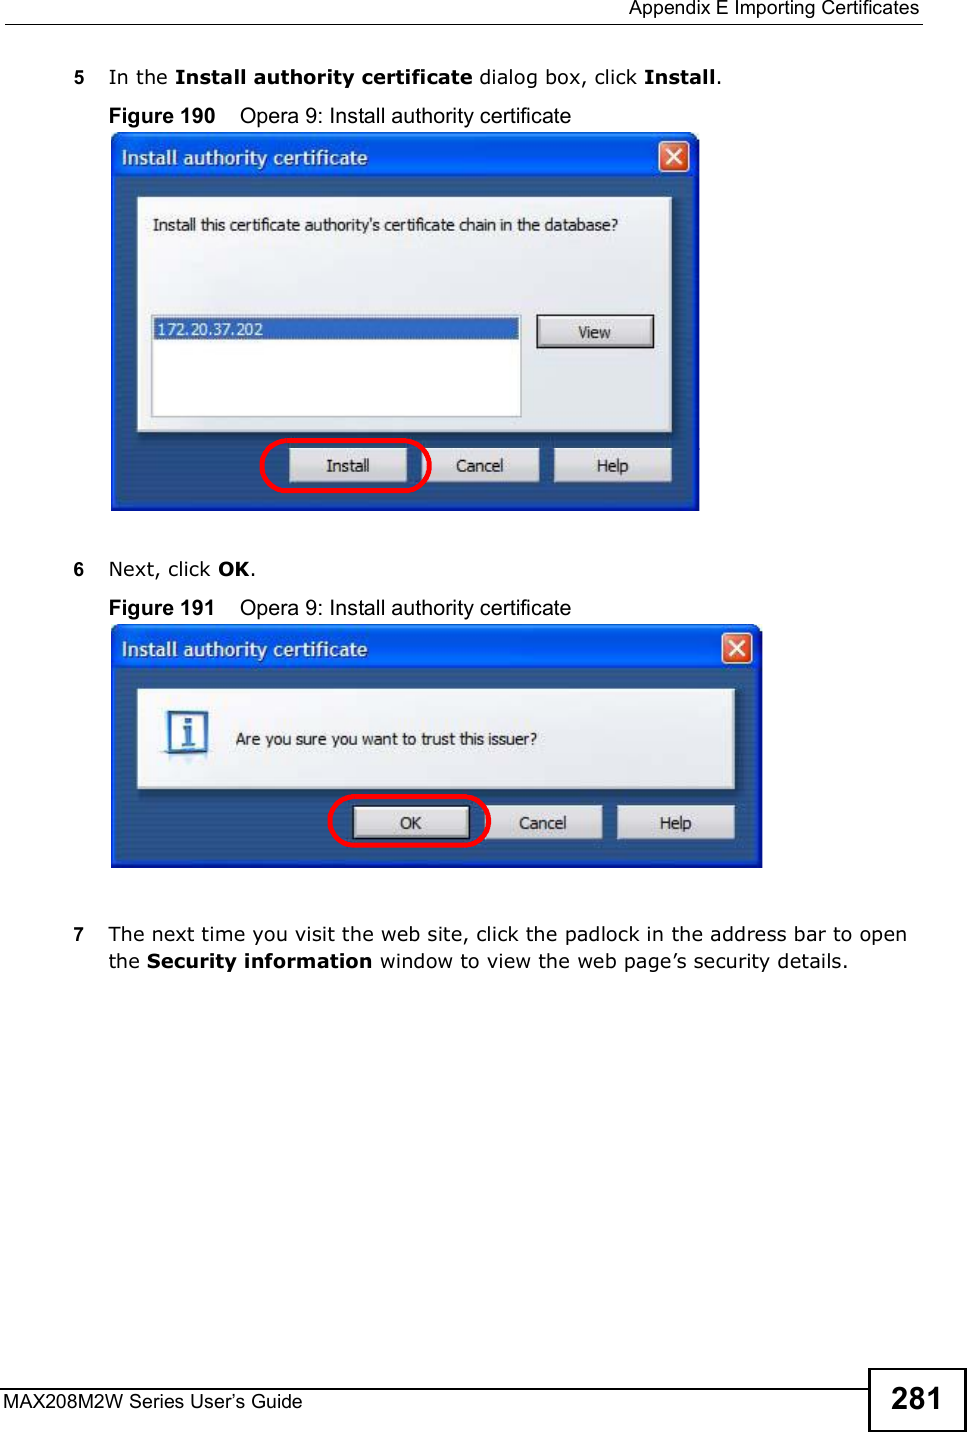  Appendix EImporting CertificatesMAX208M2W Series User s Guide 2815In the Install authority certificate dialog box, click Install.Figure 190    Opera 9: Install authority certificate6Next, click OK.Figure 191    Opera 9: Install authority certificate7The next time you visit the web site, click the padlock in the address bar to open the Security information window to view the web page s security details.